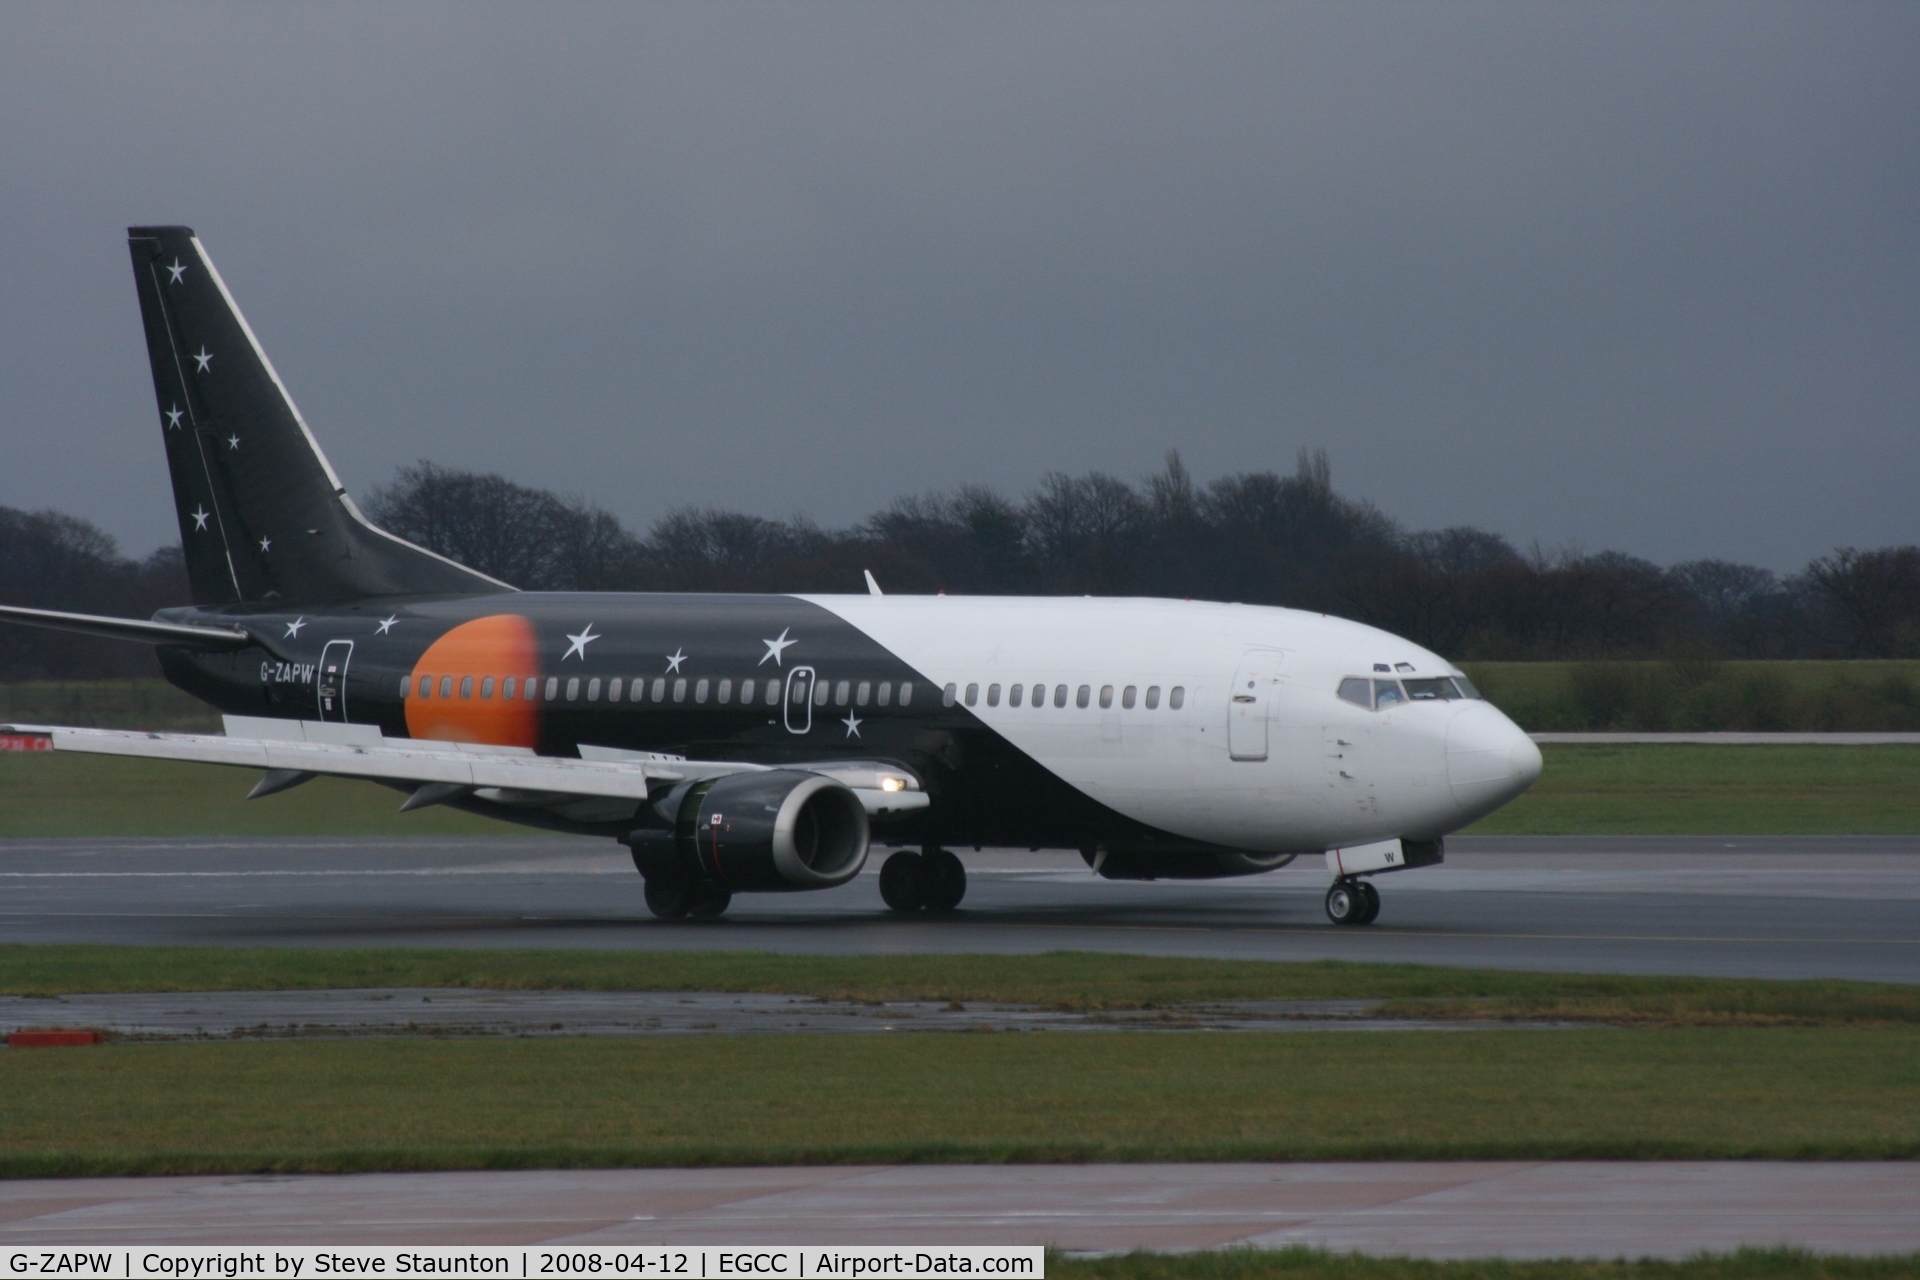 G-ZAPW, 1988 Boeing 737-3L9 C/N 24219, Taken at Manchester Airport on a typical showery April day